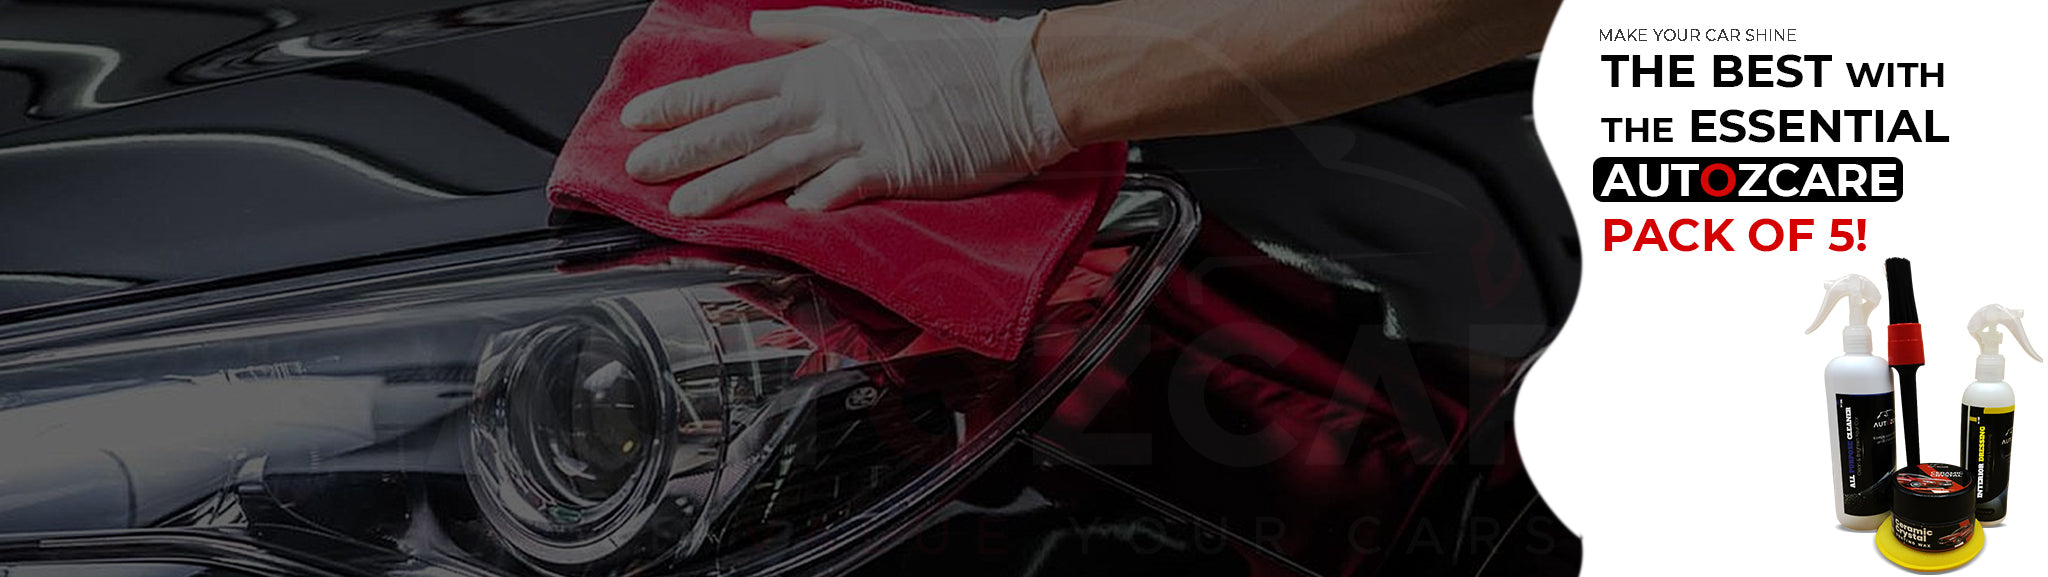 Make your car shine the best with the essential autozcare pack of 5!